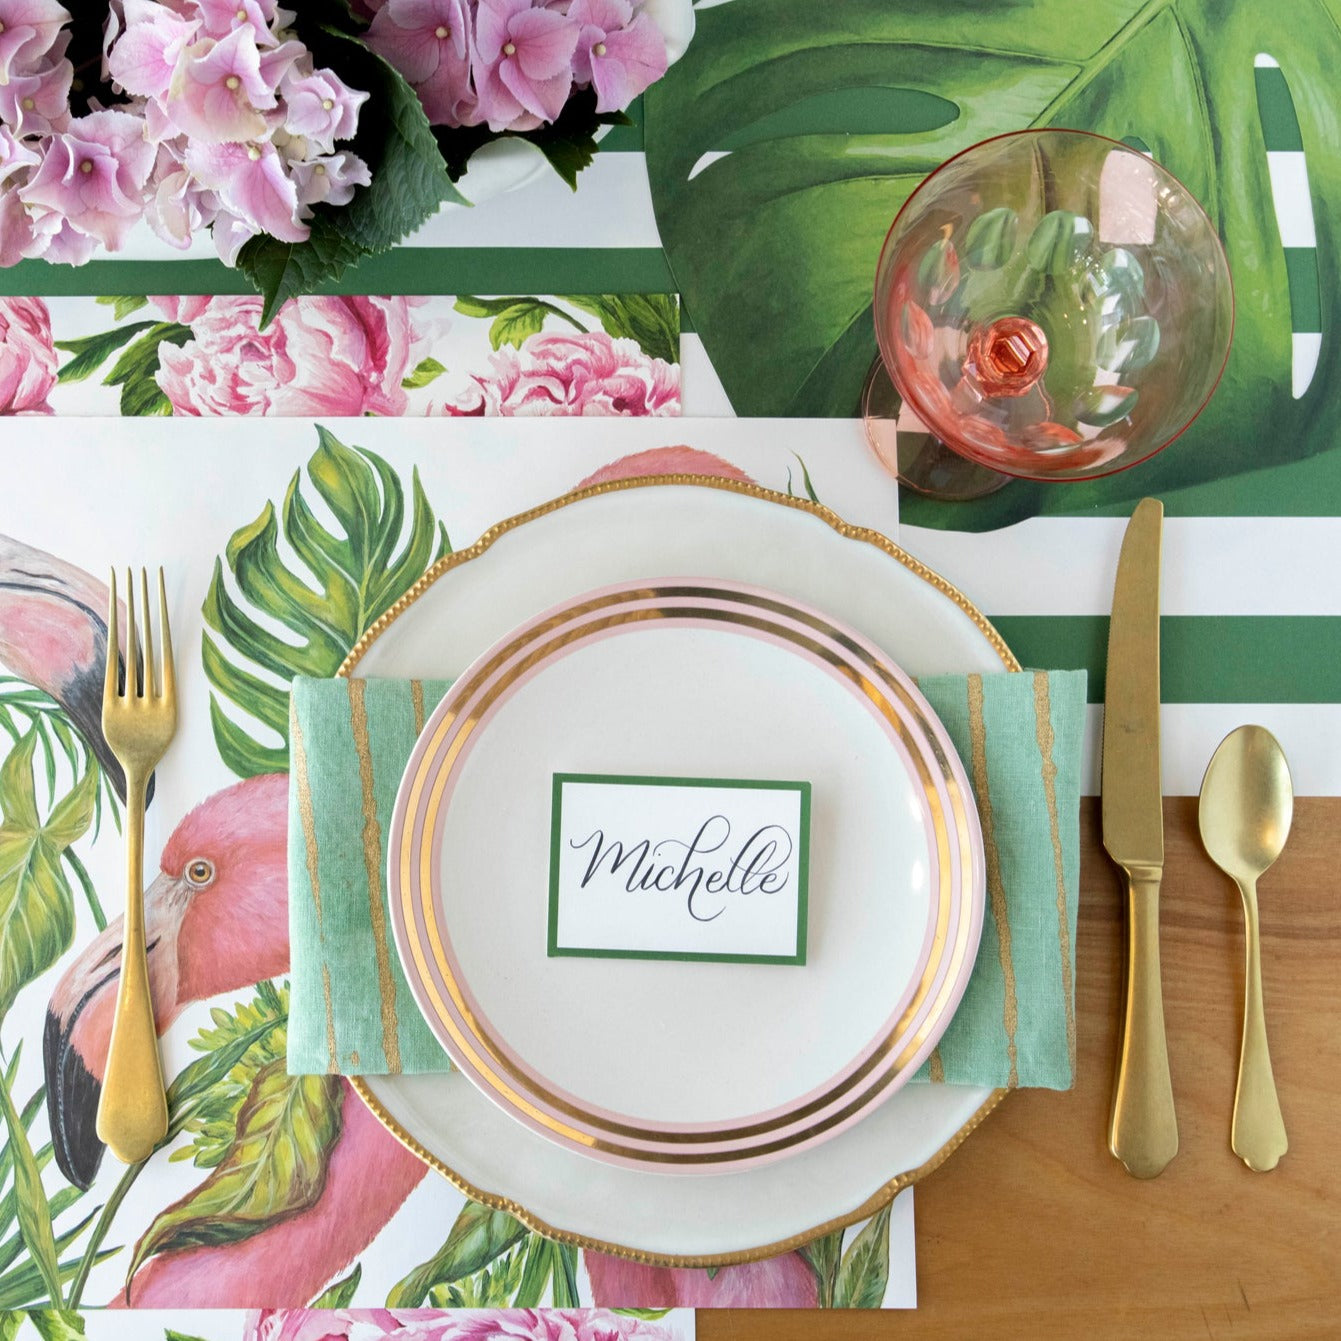 A table setting with an elegant touch of the Die-cut Monstera Placemat from Hester &amp; Cook, adorned with flamingos and flowers.